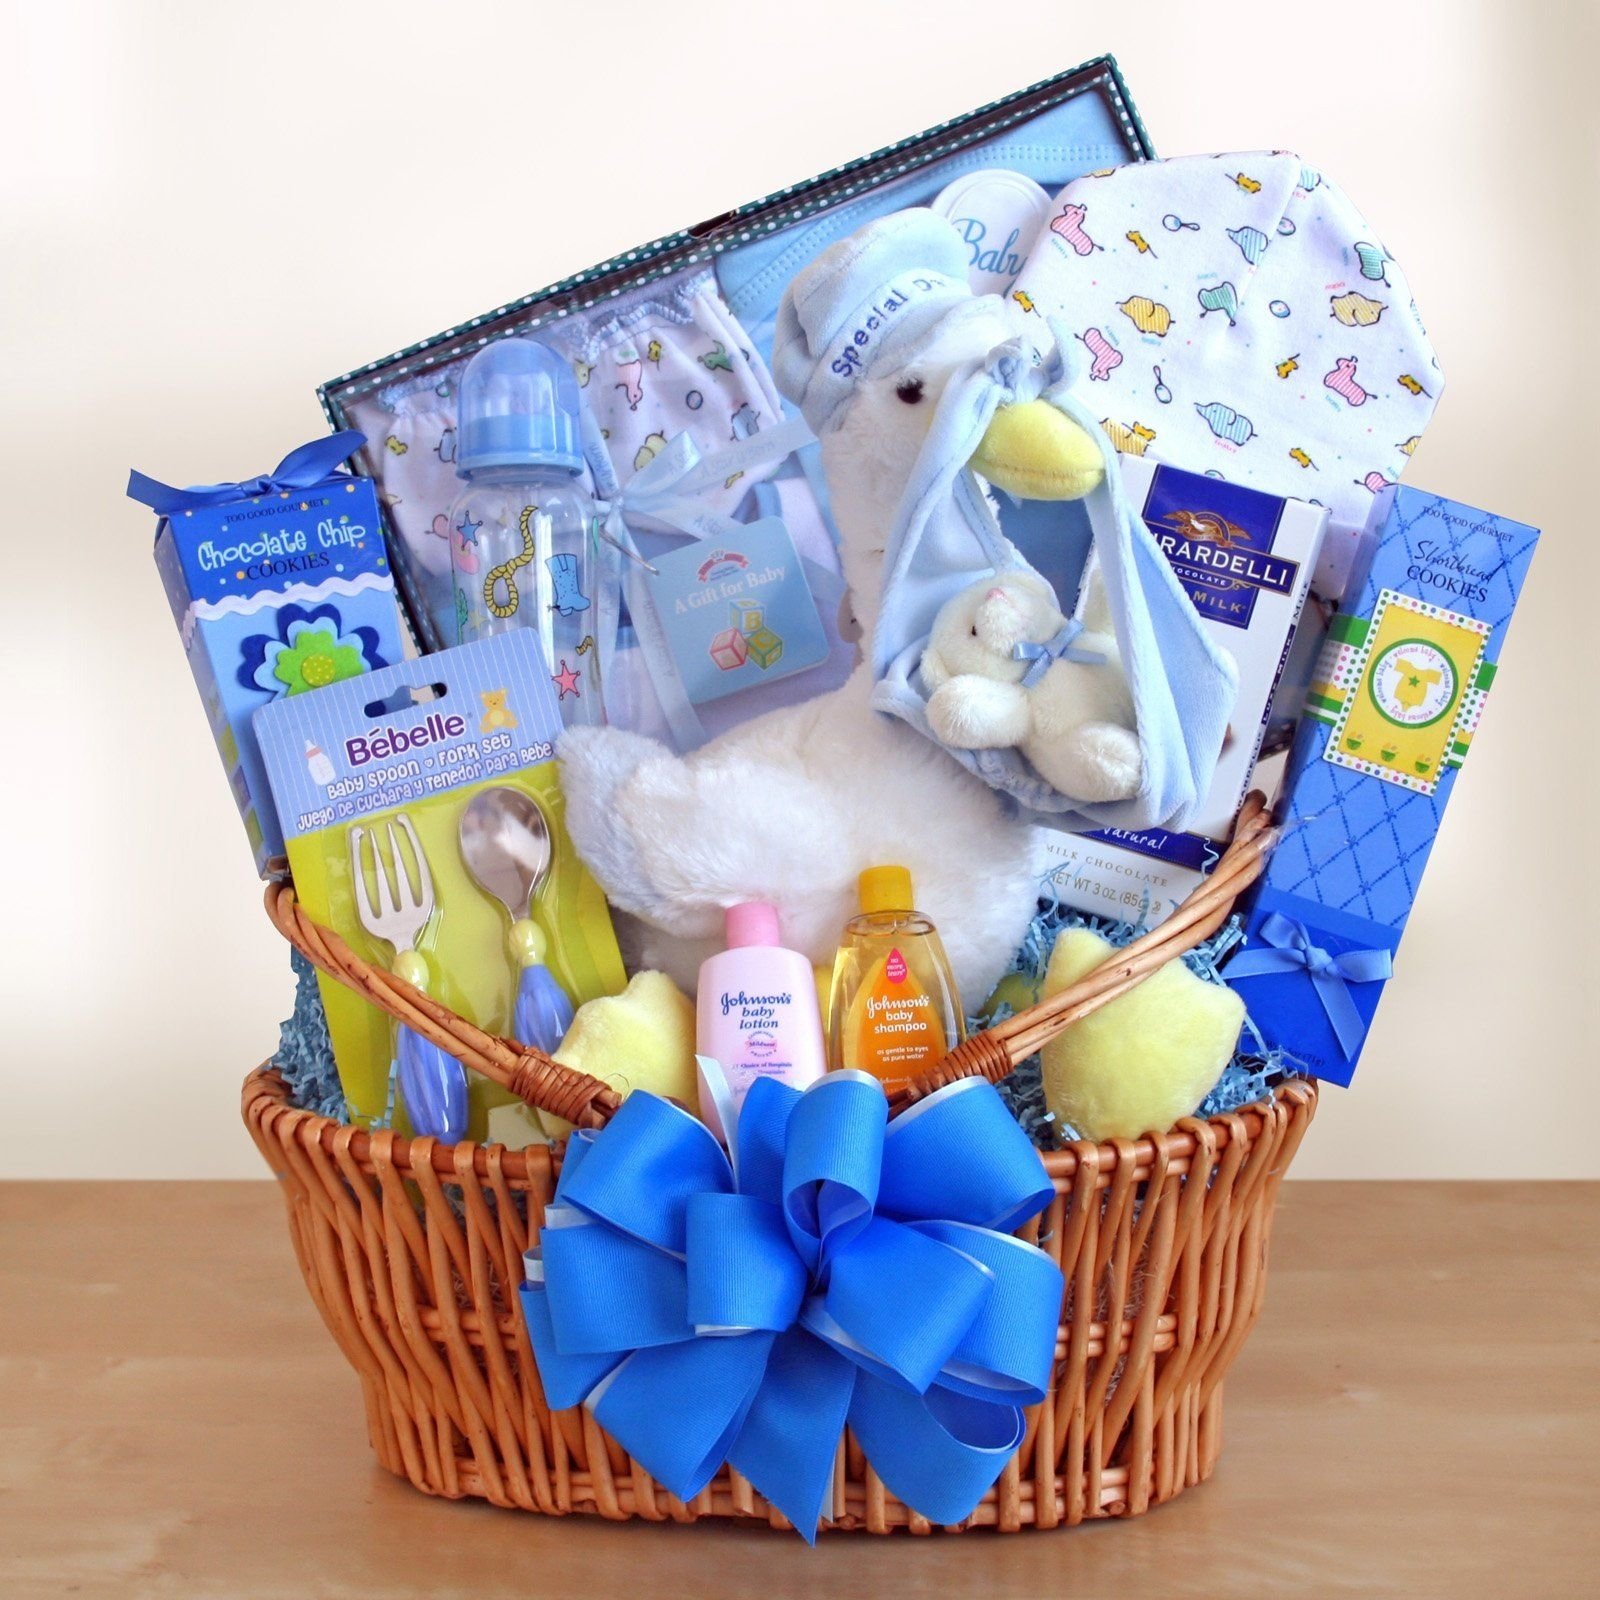 10 Pretty Unique Baby Boy Gifts Ideas special stork delivery baby boy gift basket baby shower gift 3 2022